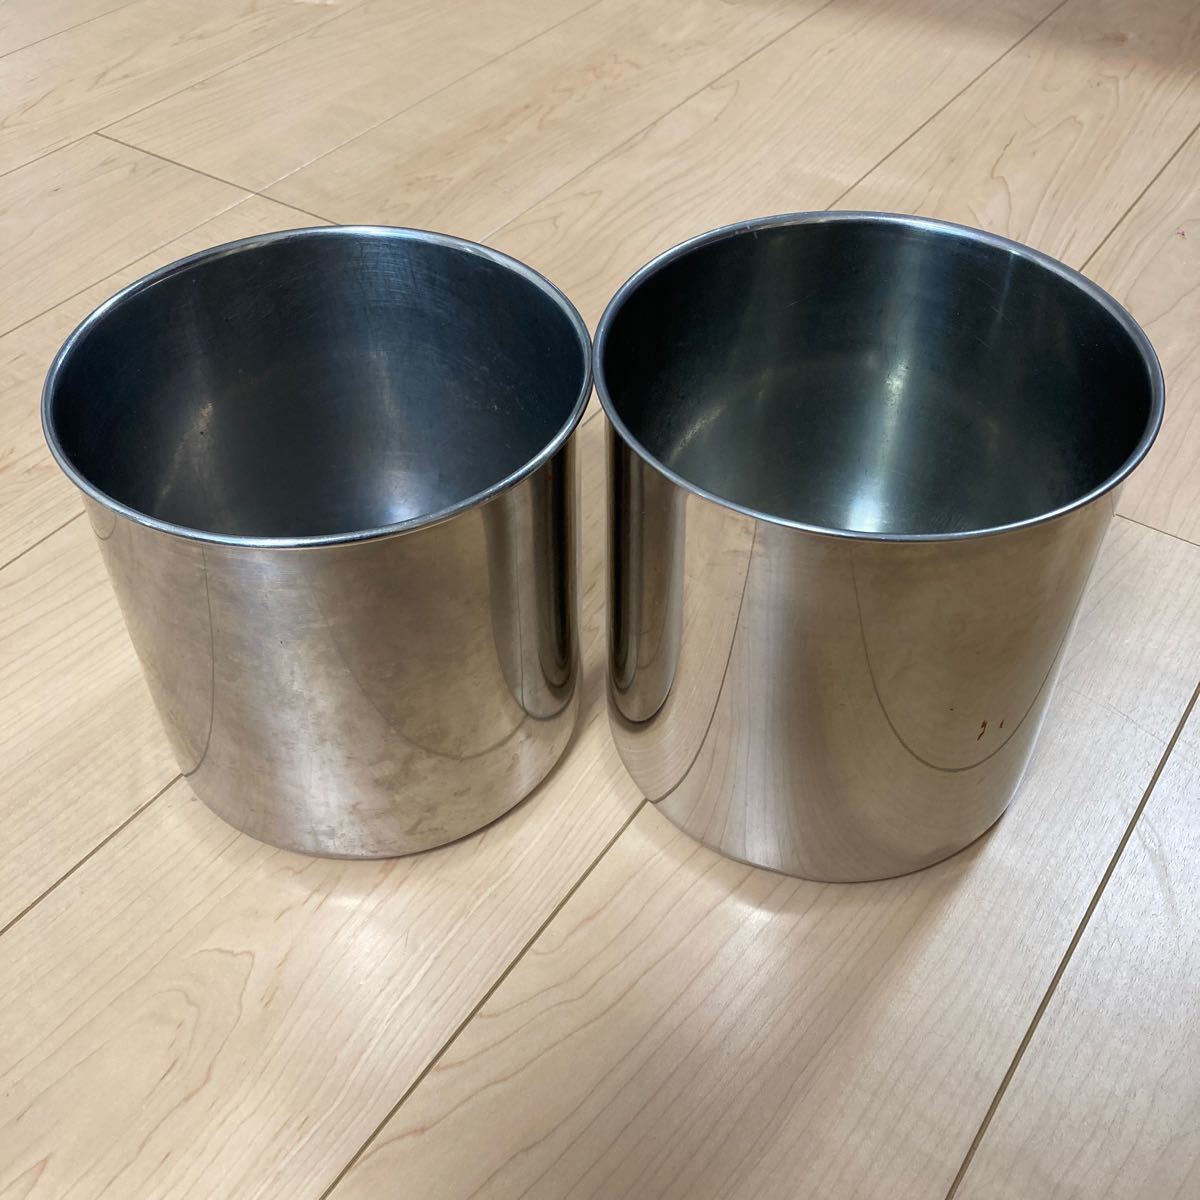 [ secondhand goods ] round deep type kitchen pot / stainless steel pot / stockpot / cookware / business use / cover attaching / 6 piece set 